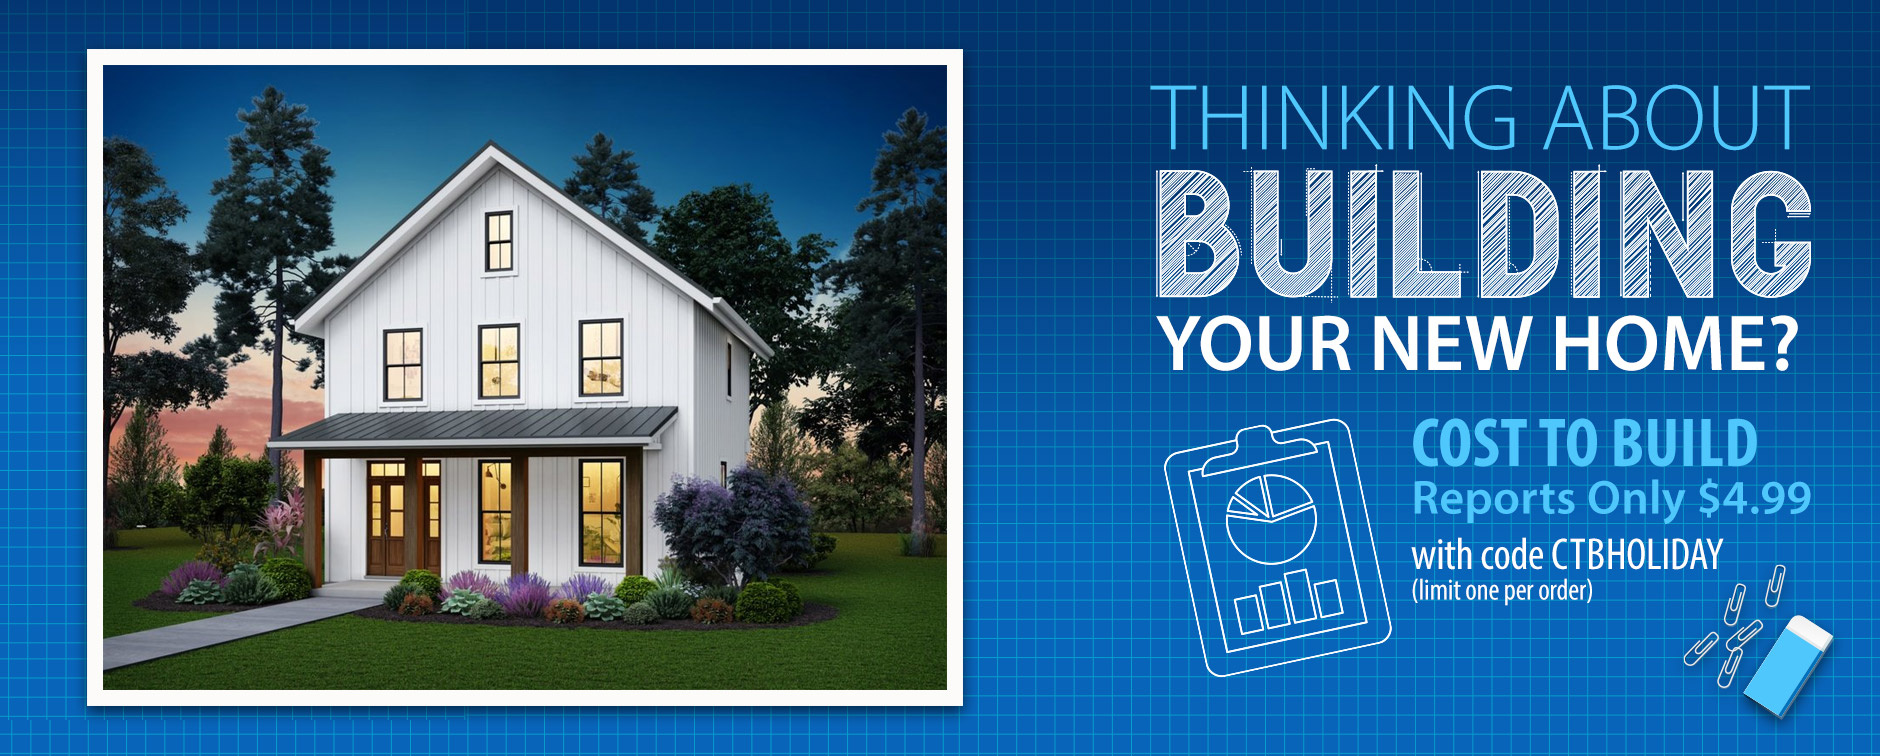 Thinking About Building Your New Home? Cost-to-Build Reports Only $4.99 with Code CTBHOLIDAY